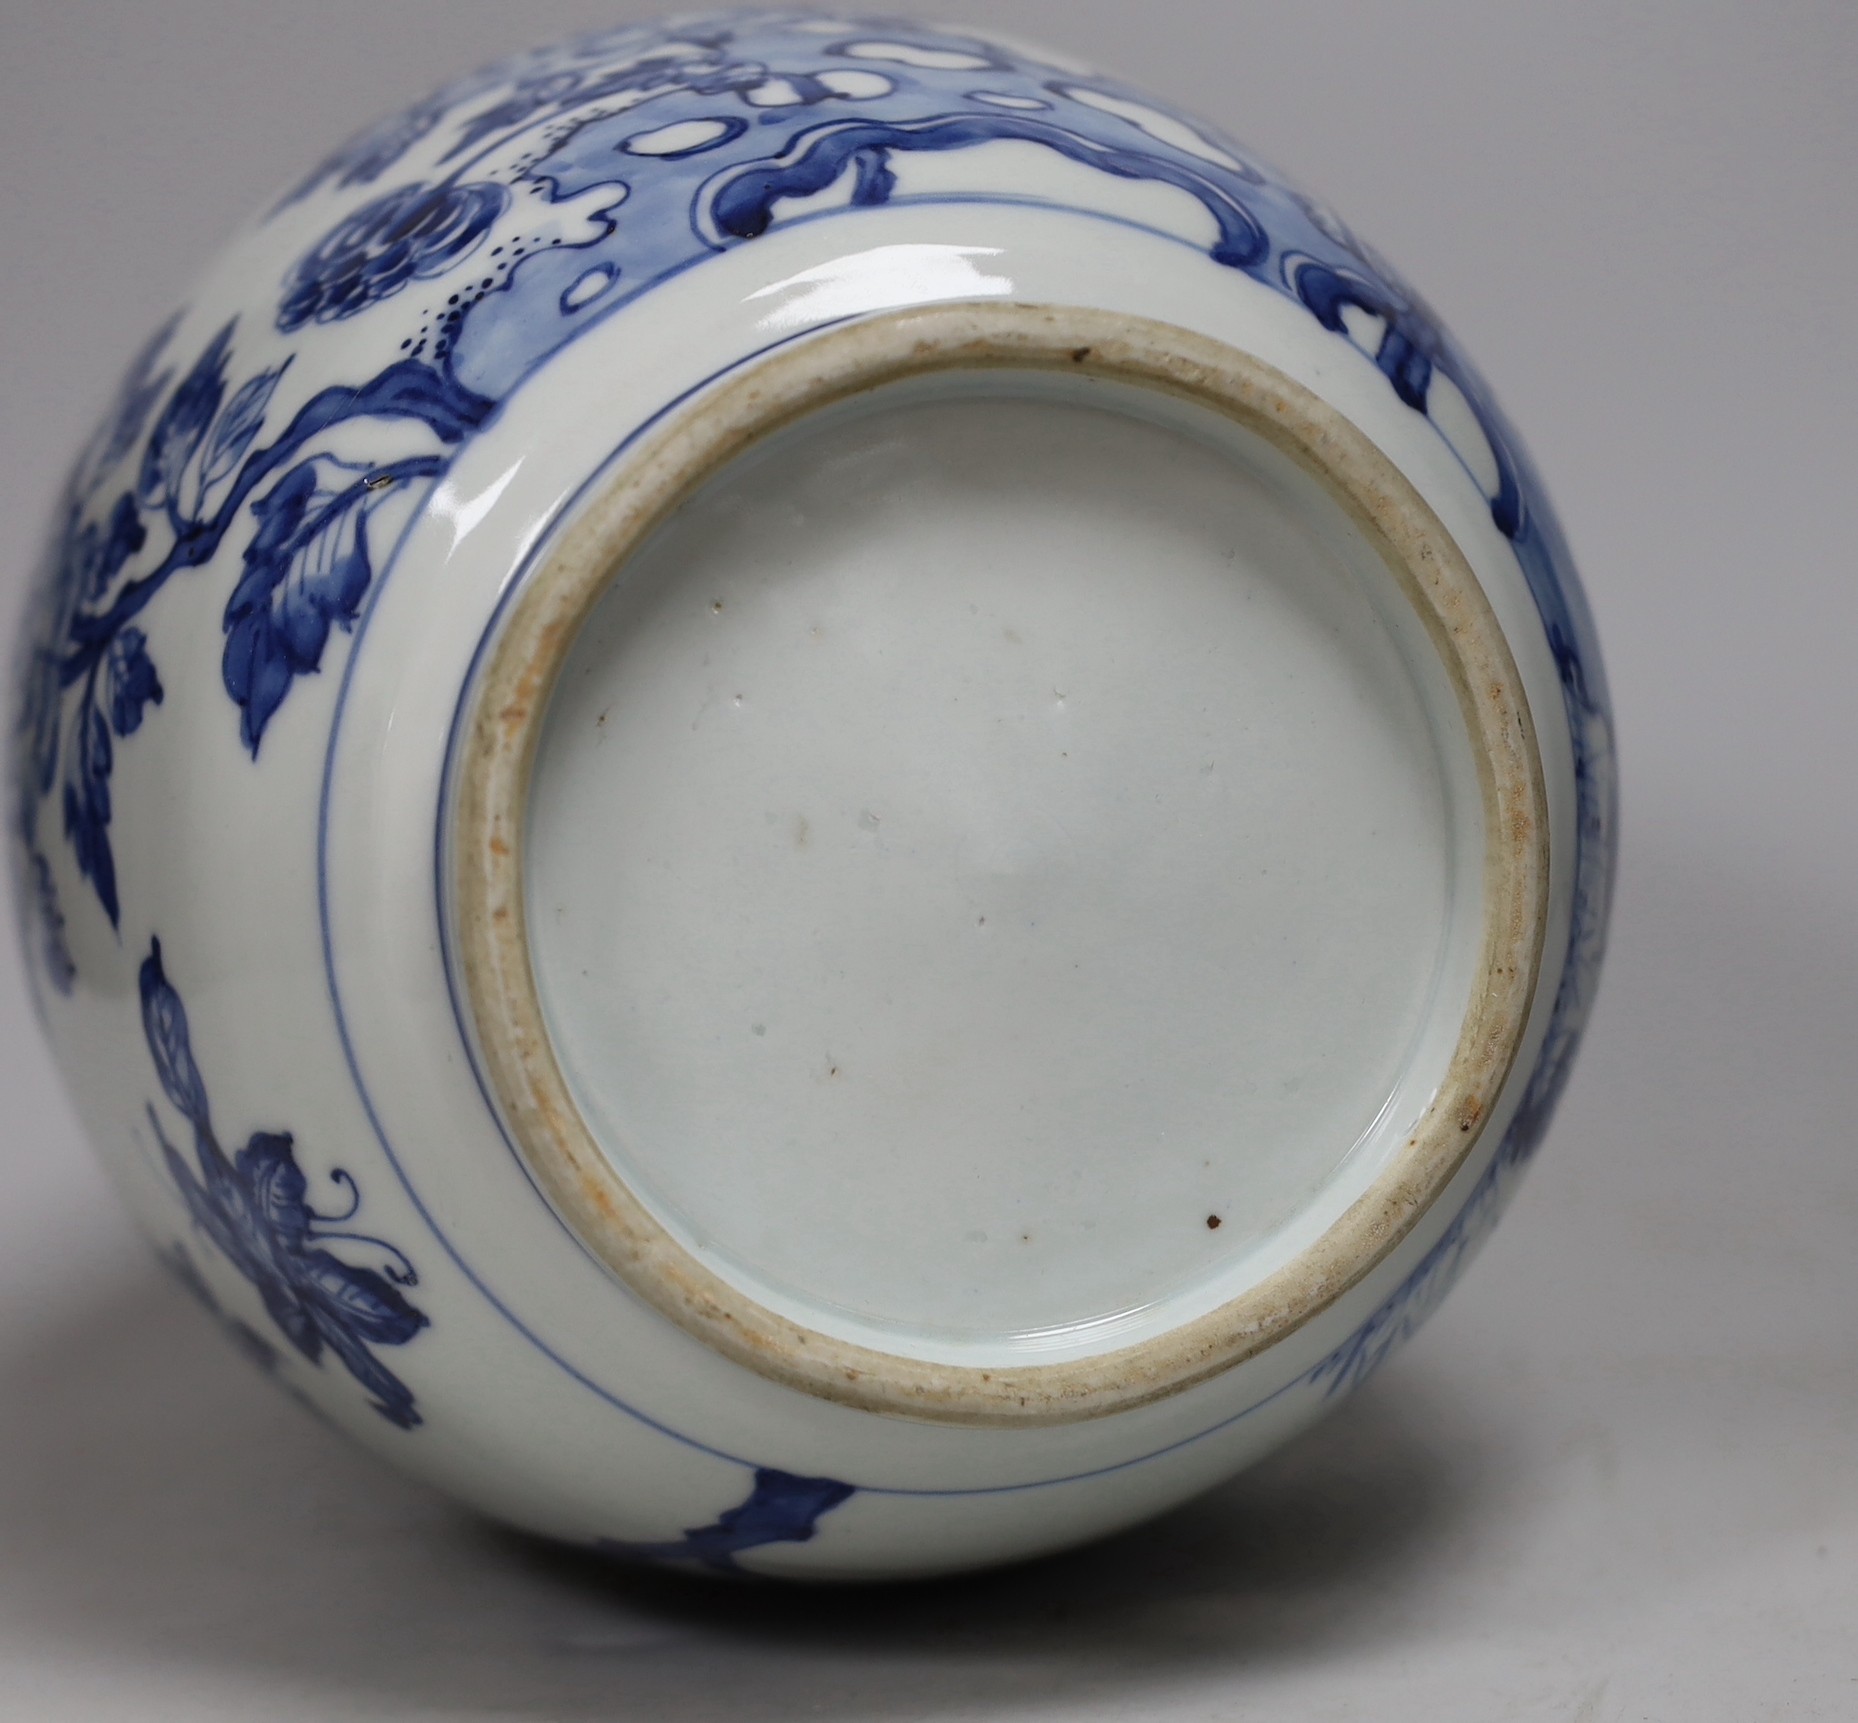 A Chinese blue and white bird amongst the branches ovoid jar, 27cm tall